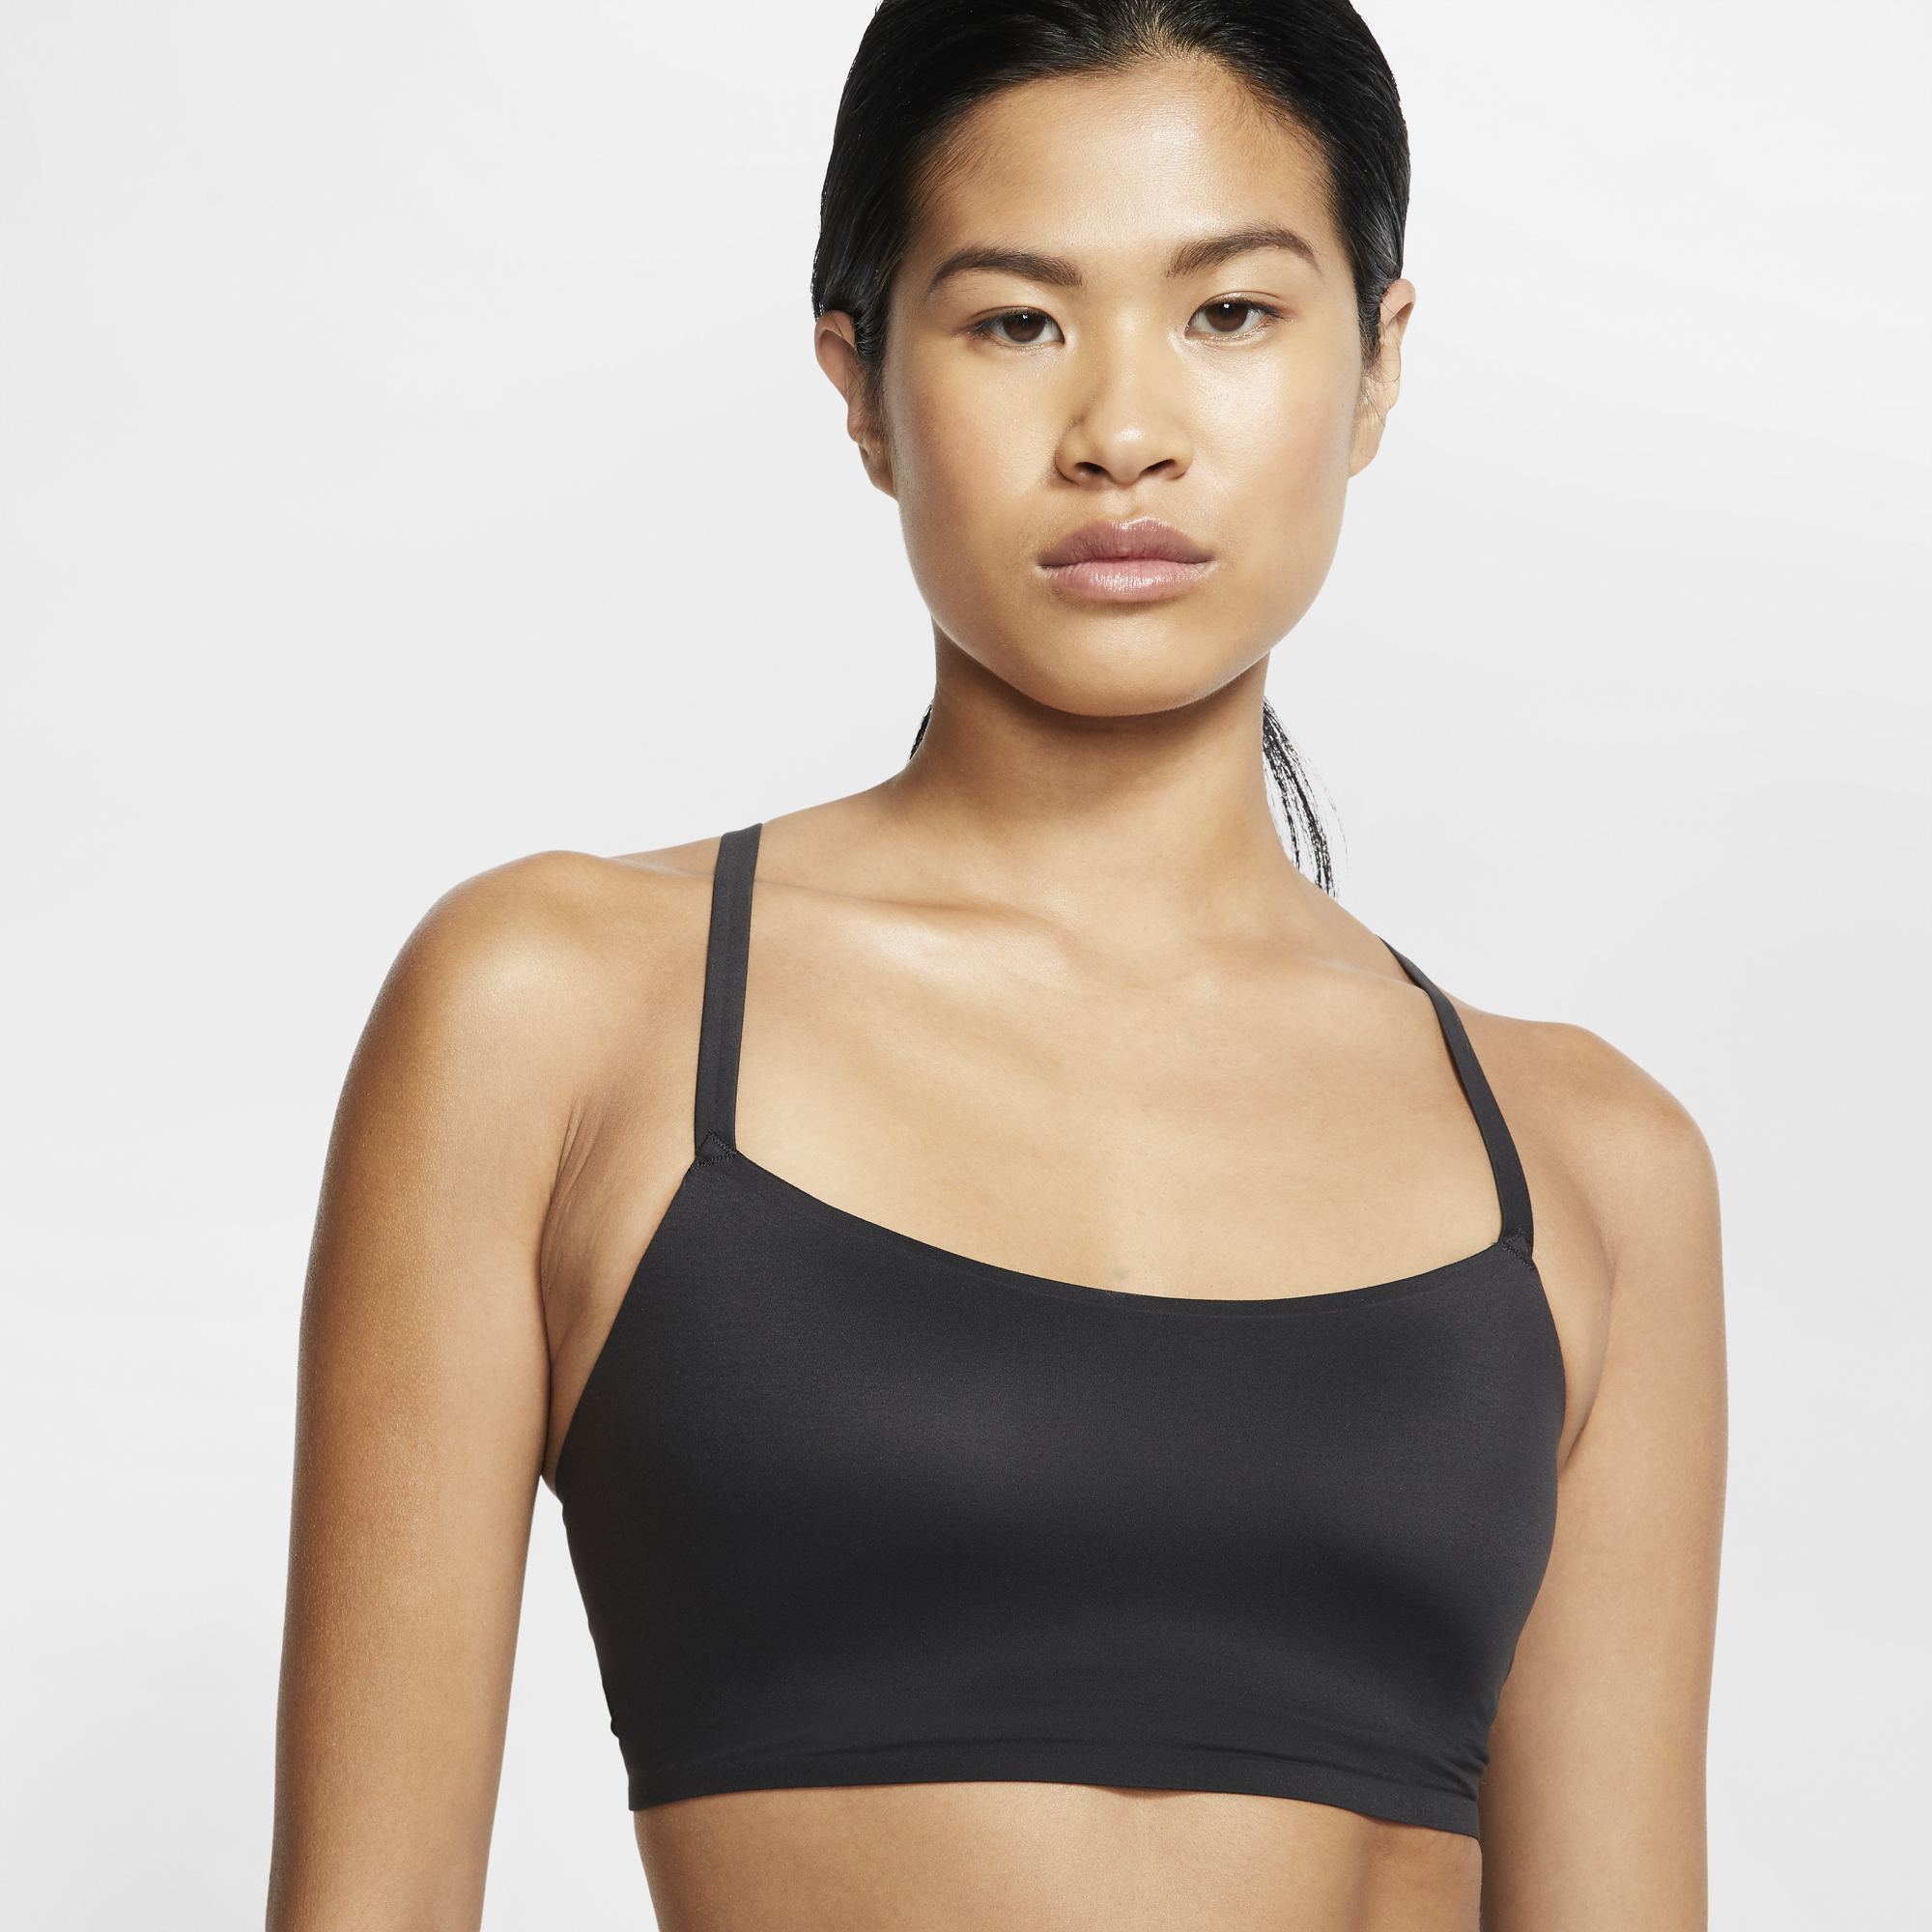 Nike's first yoga apparel collection is nothing to scoff at, the